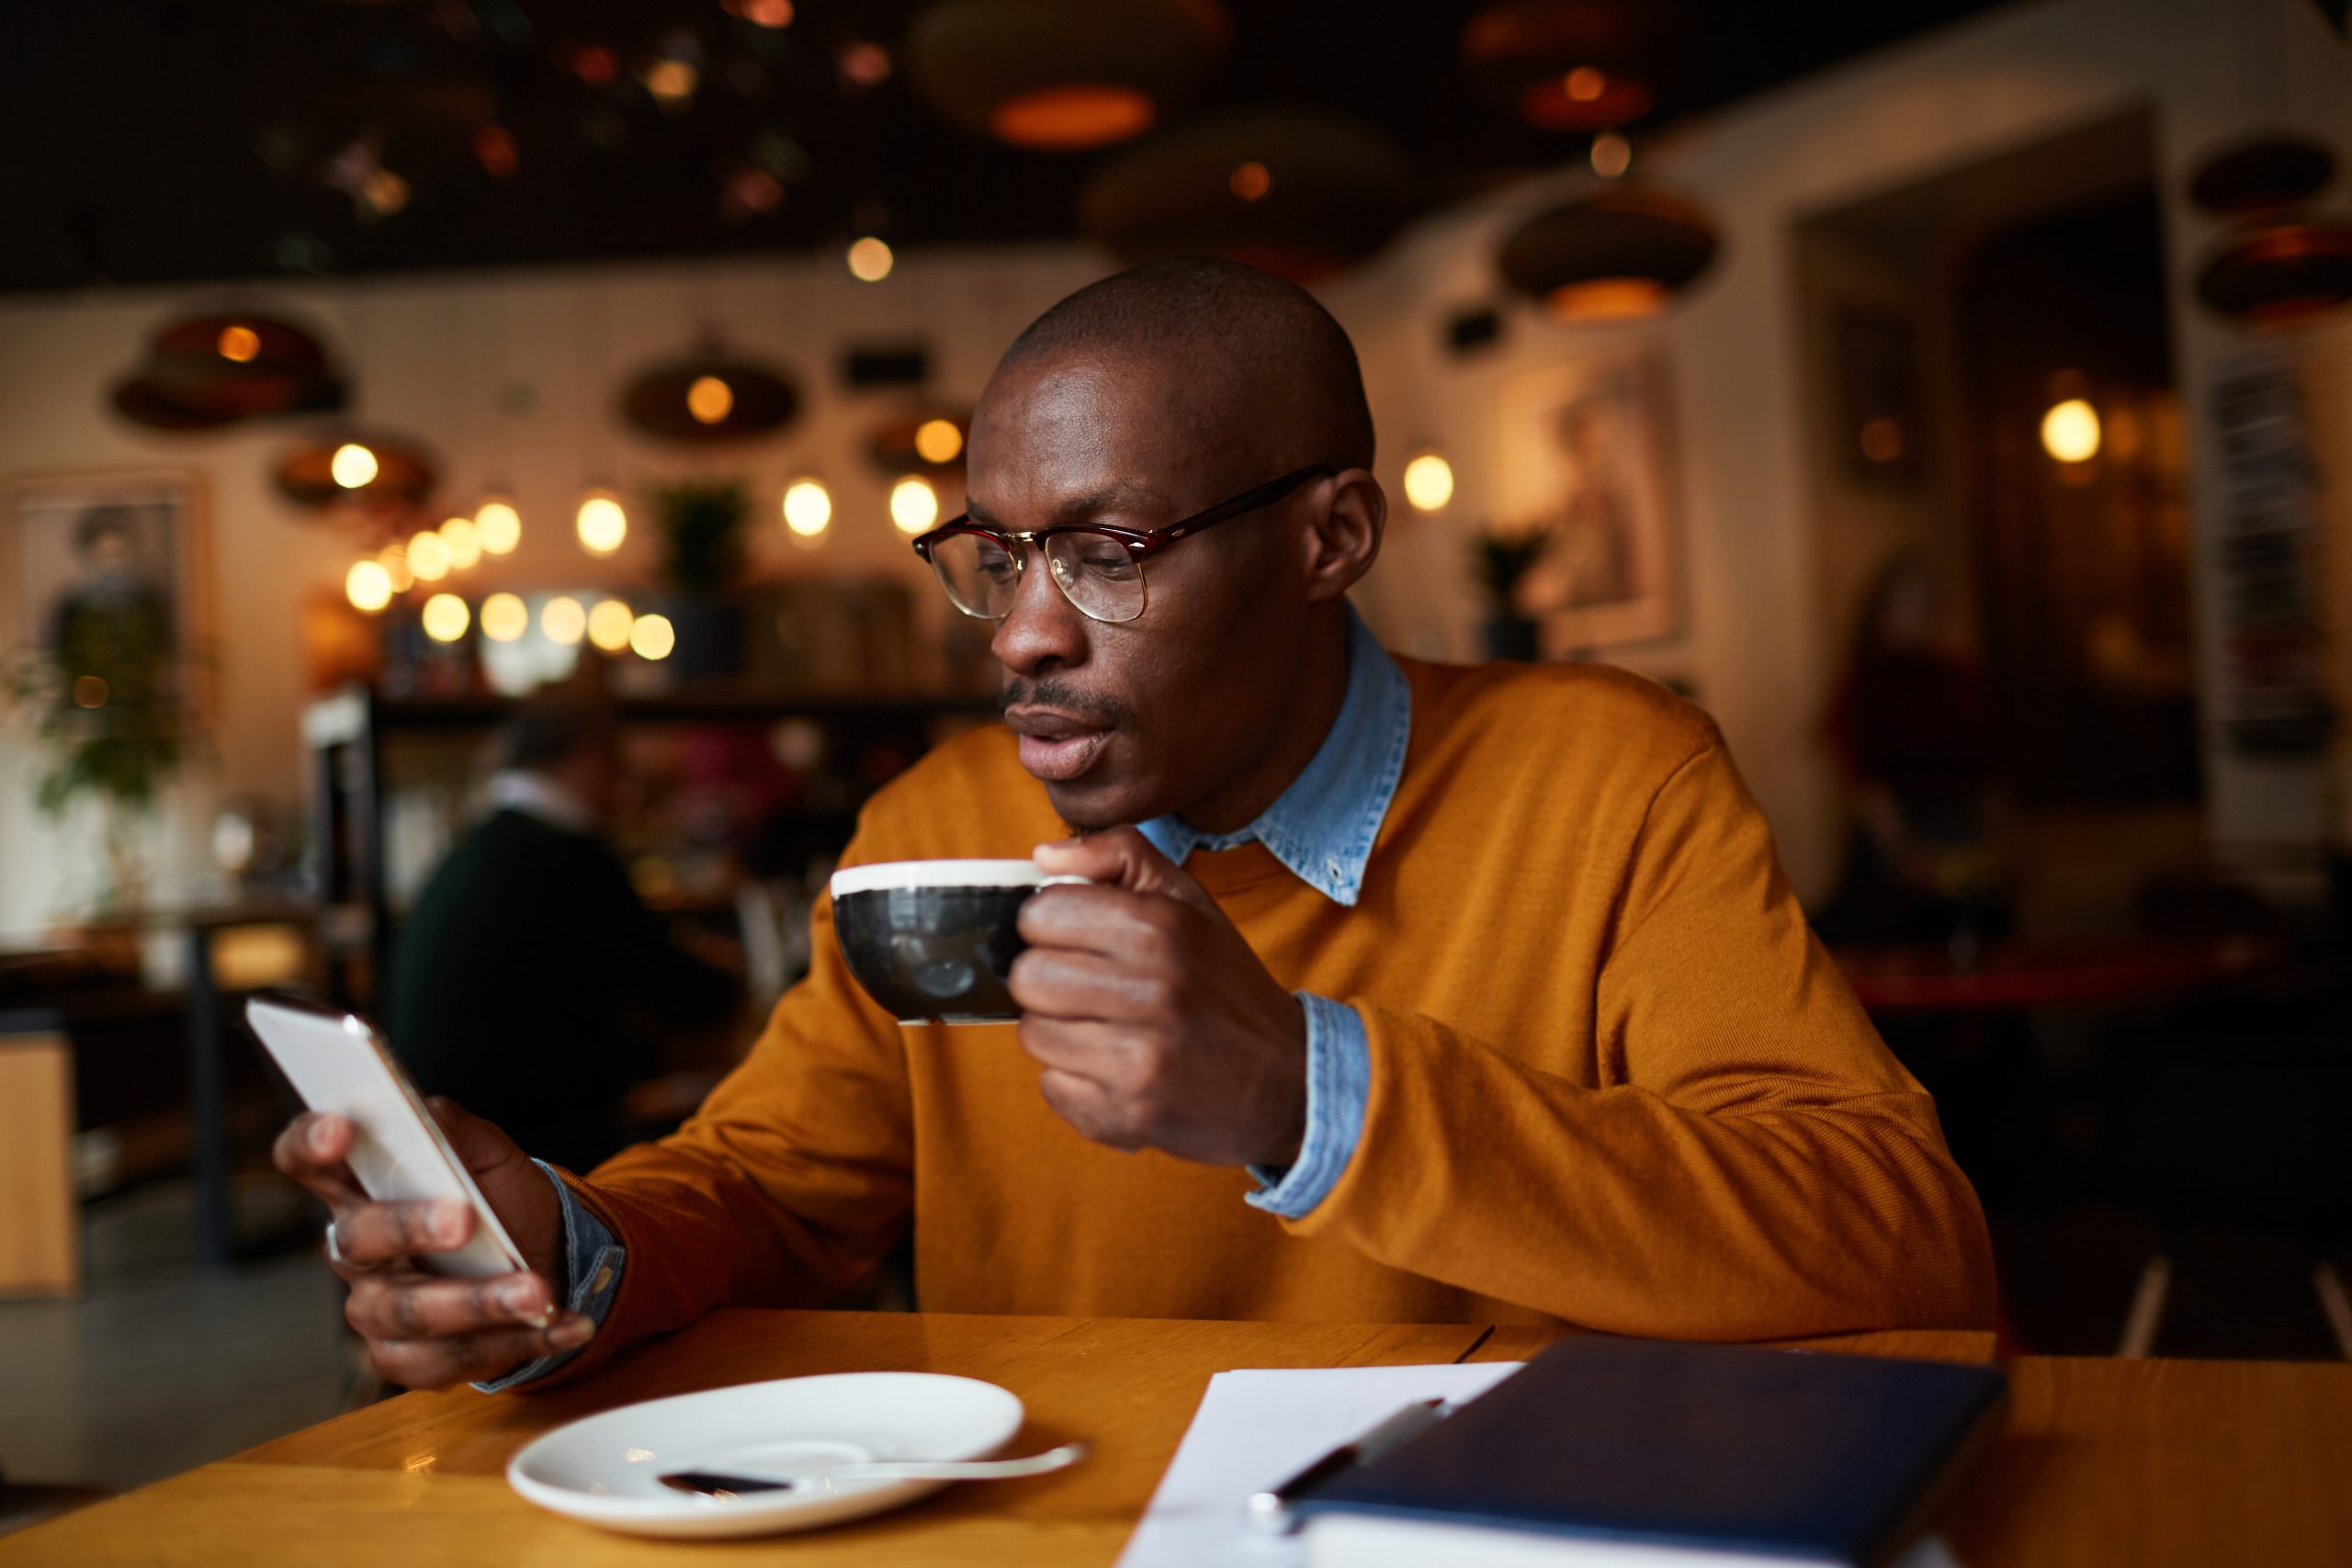 Man drinking coffee while on his phone